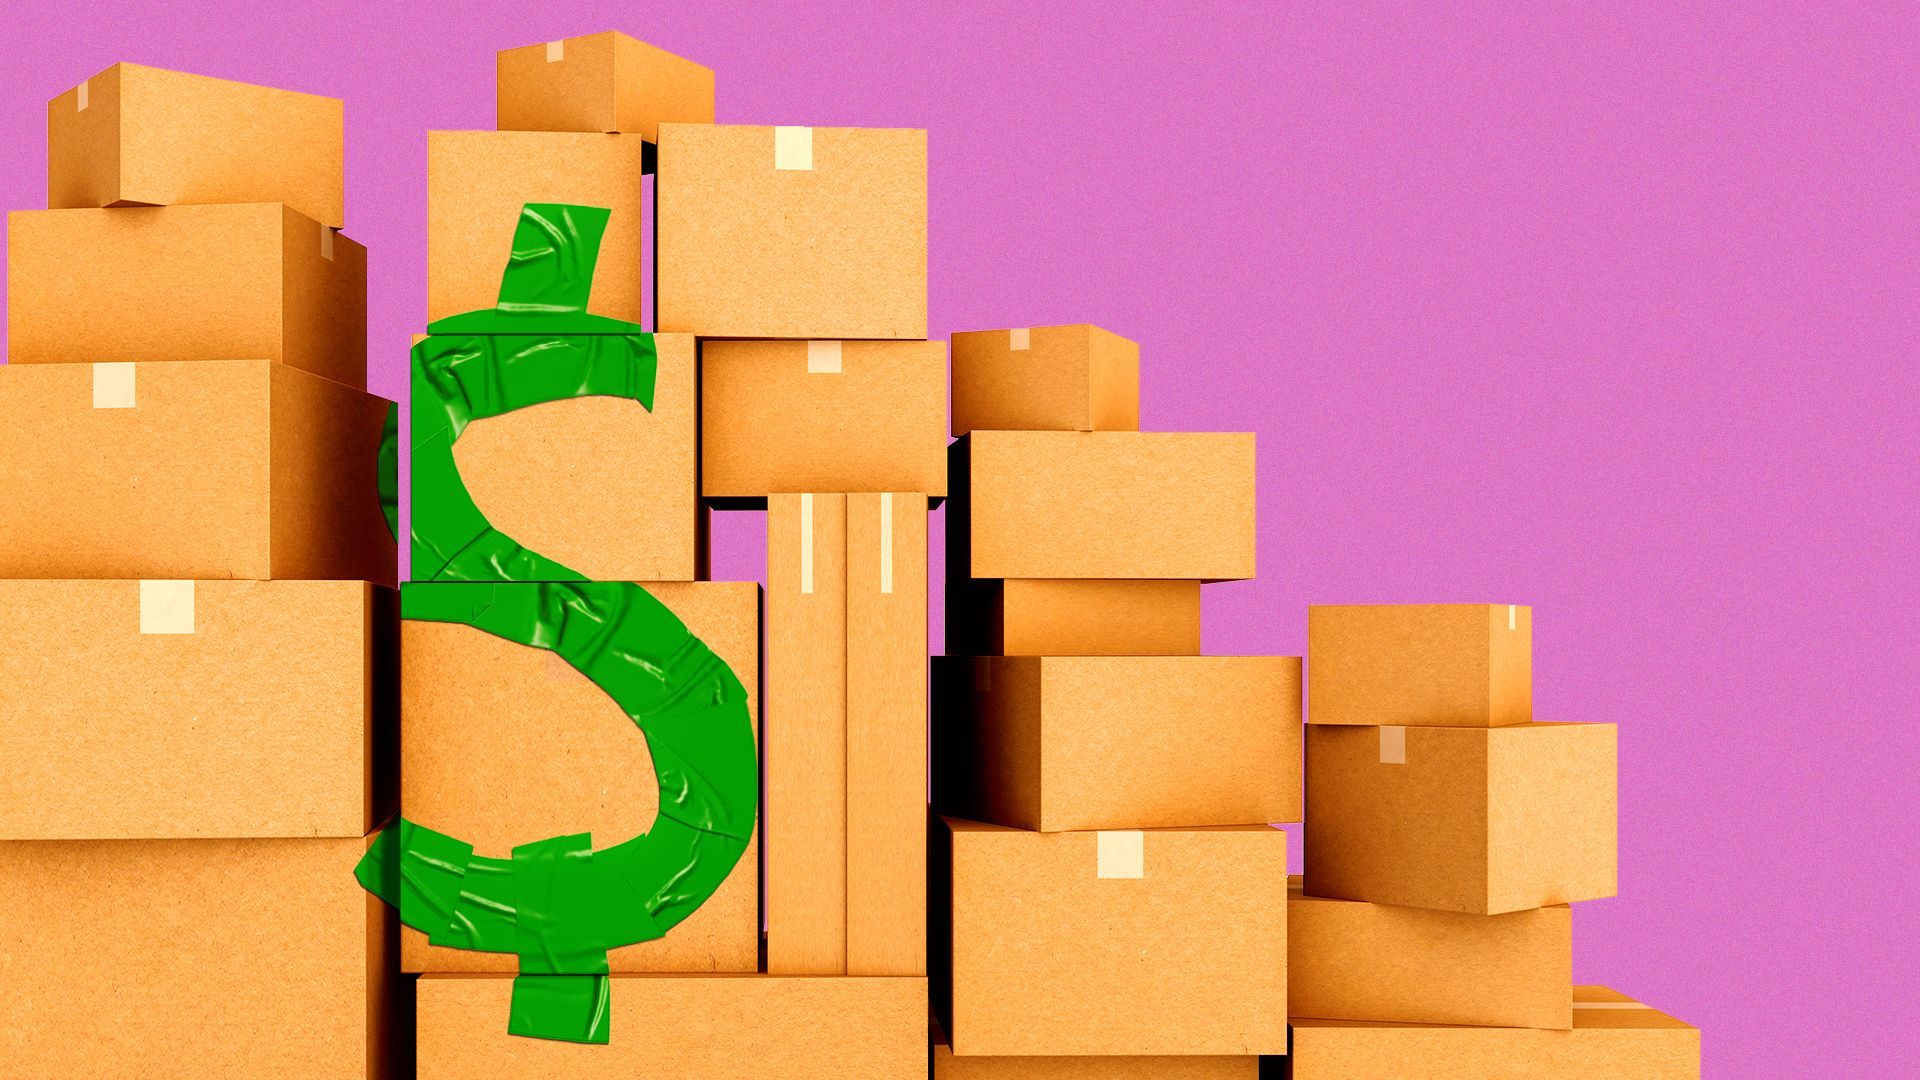 Illustration of green tape making the shape of a dollar sign on a stack of boxes.